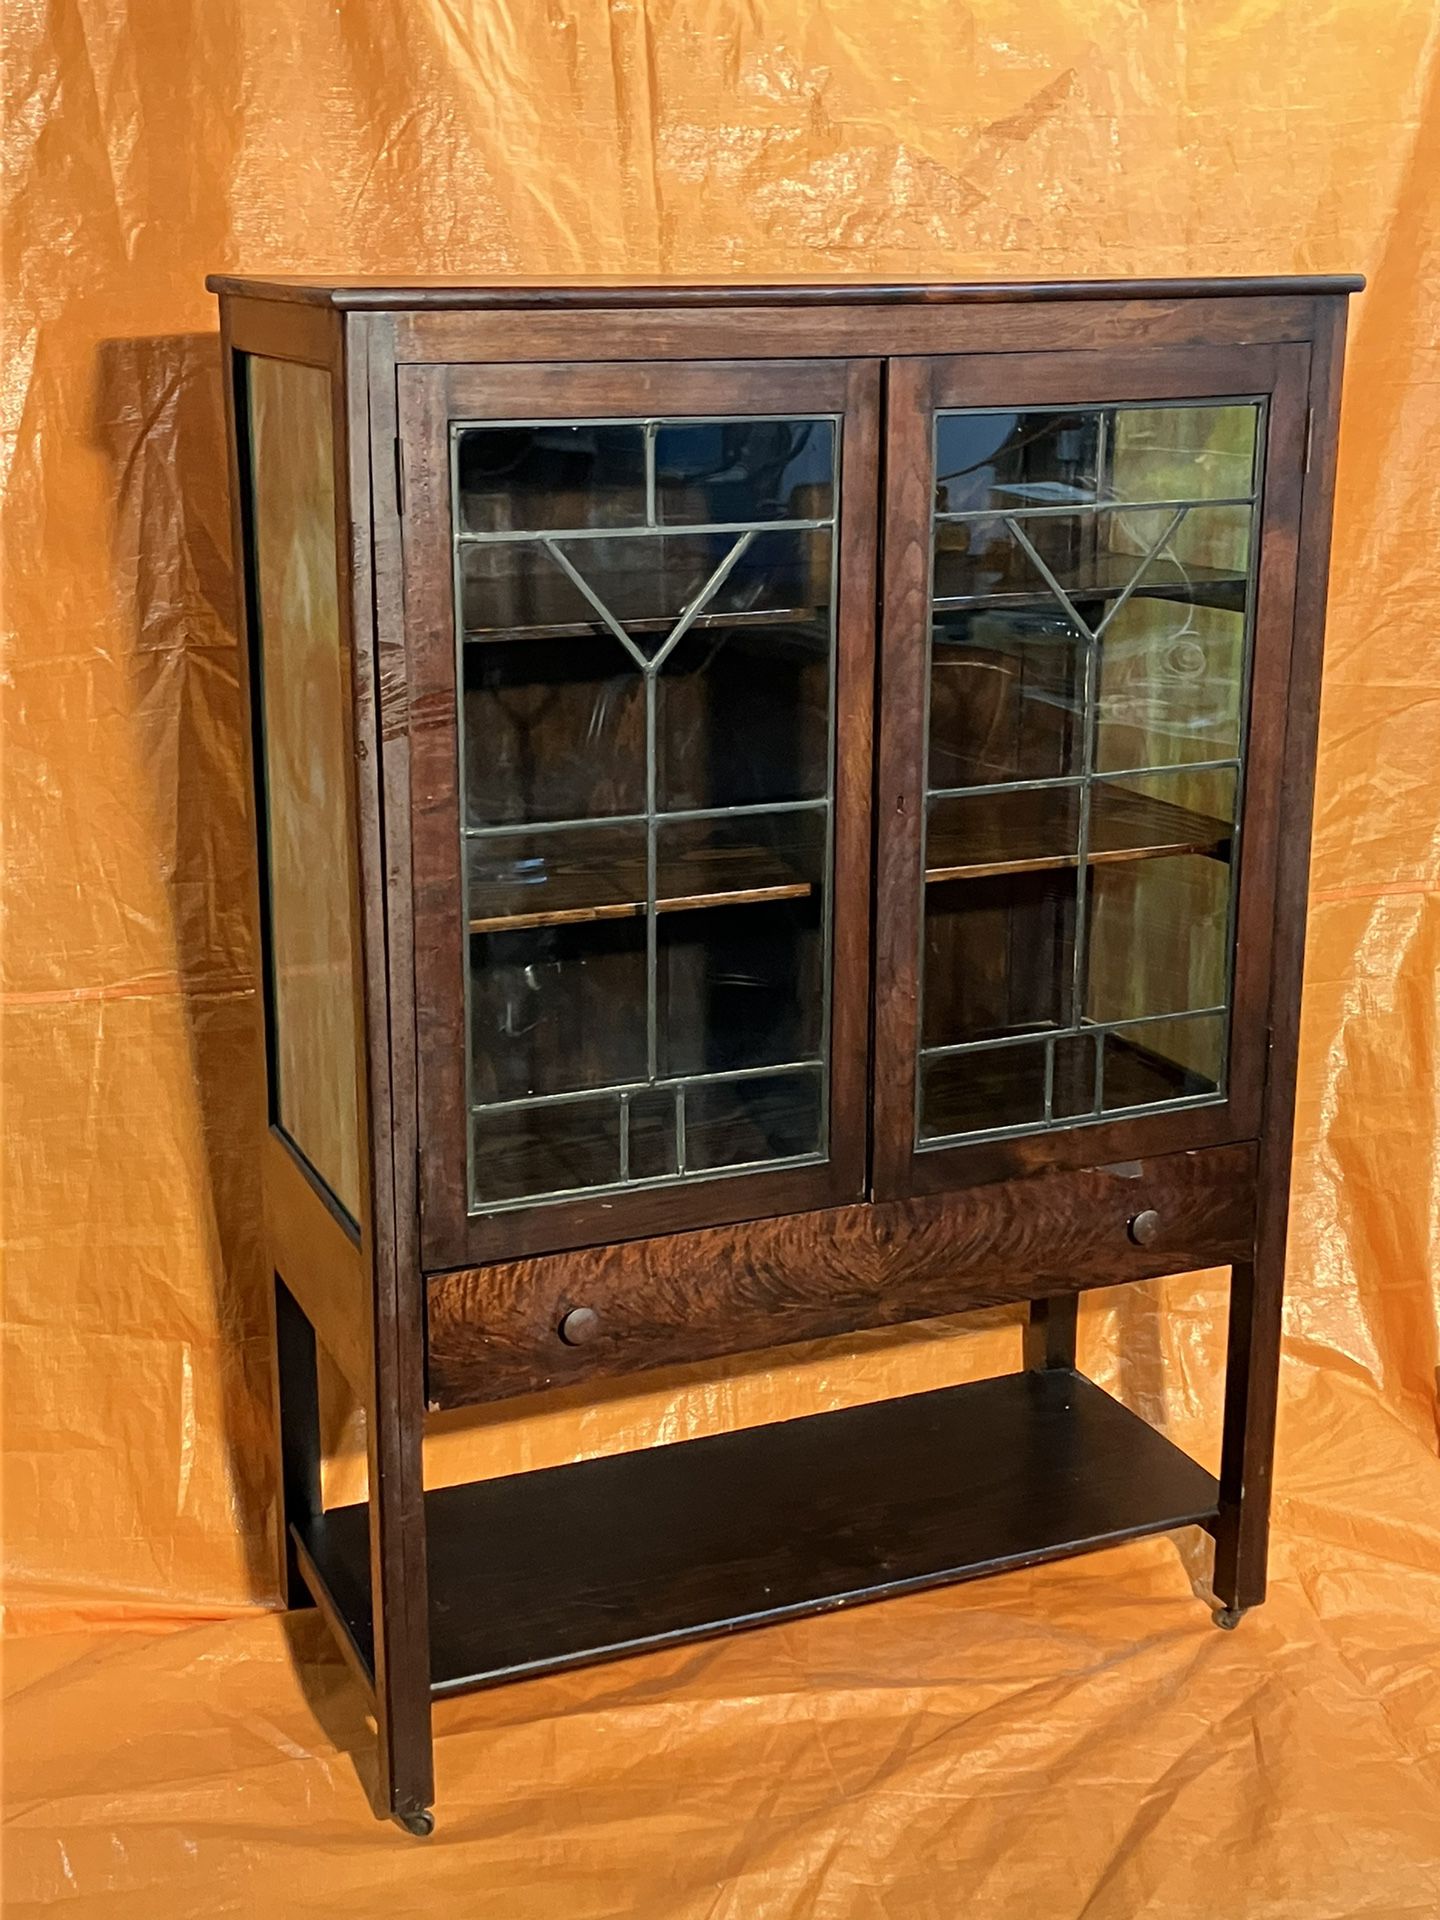 Early 20th Century Leaded Glass Front Display Case w/ Stained Glass Sides